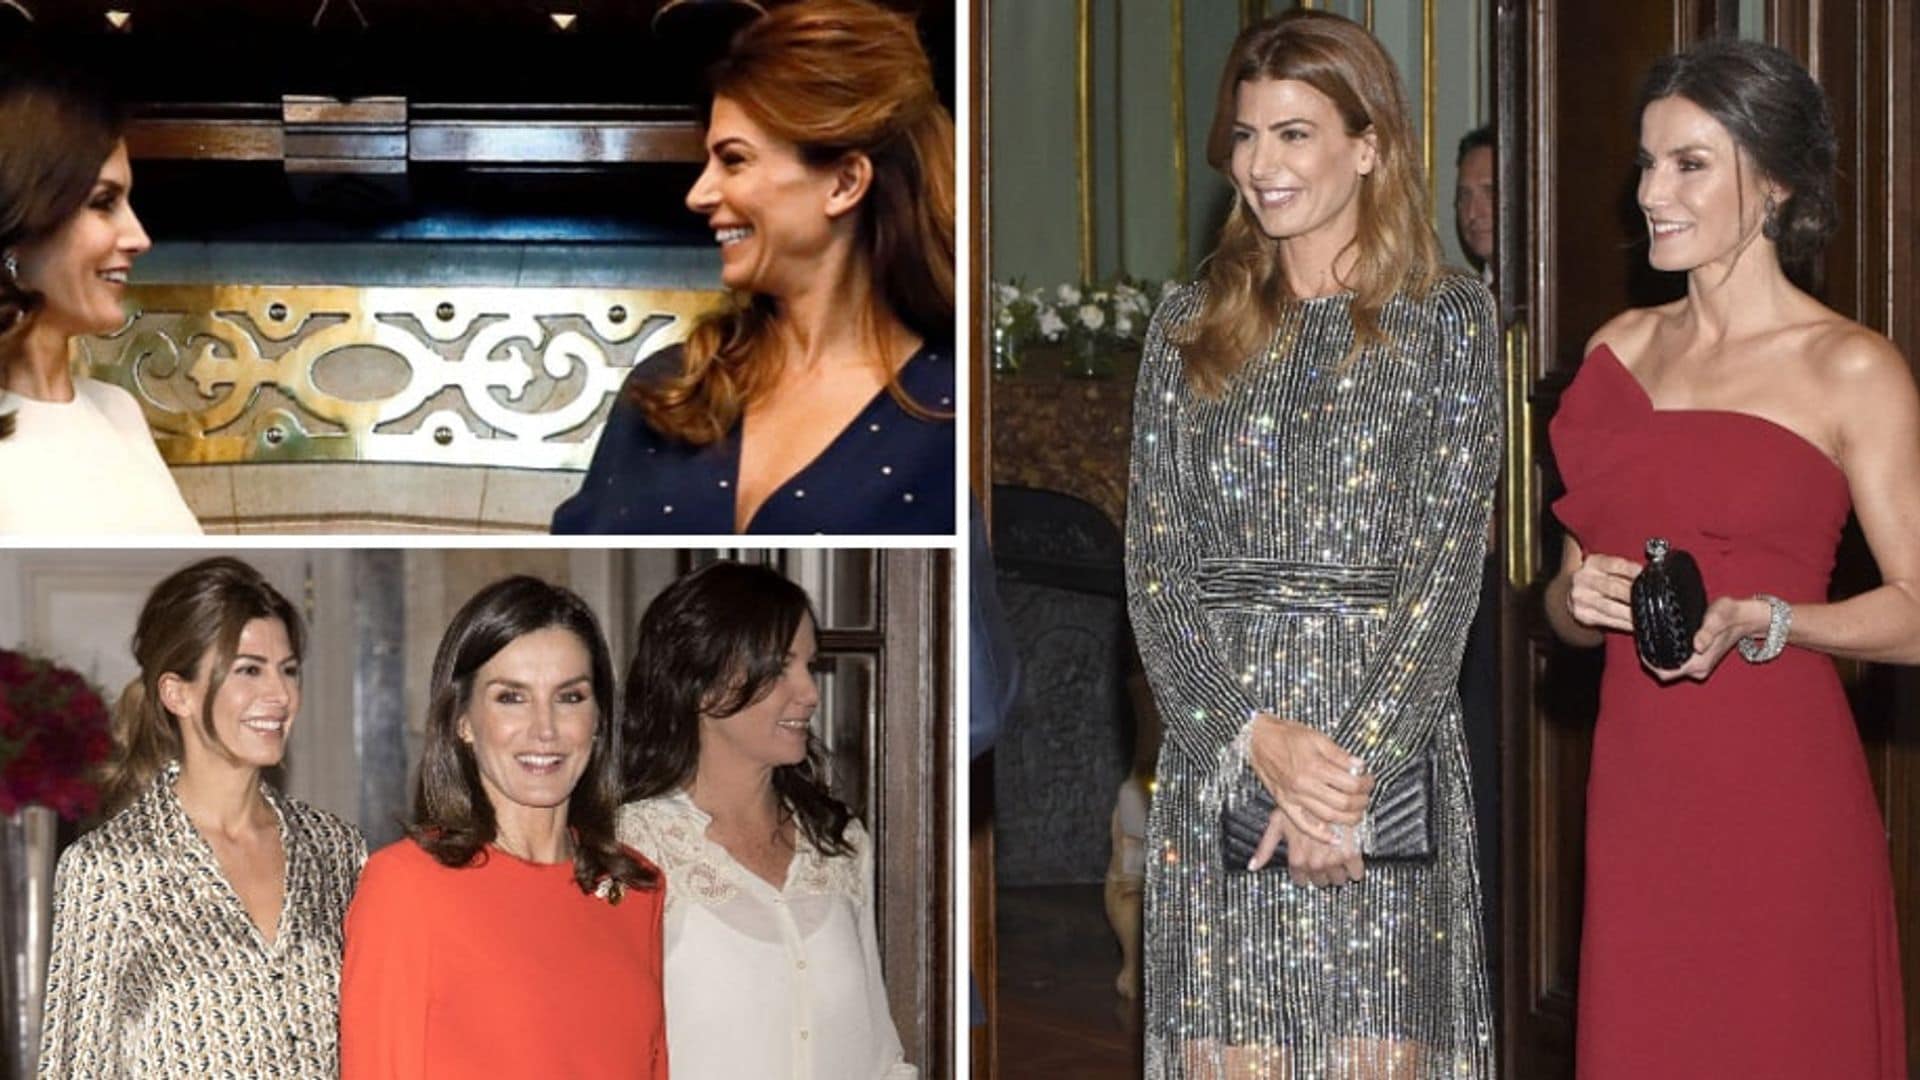 Queen Letizia and Juliana Awada reign in fashion – see their stylish looks!